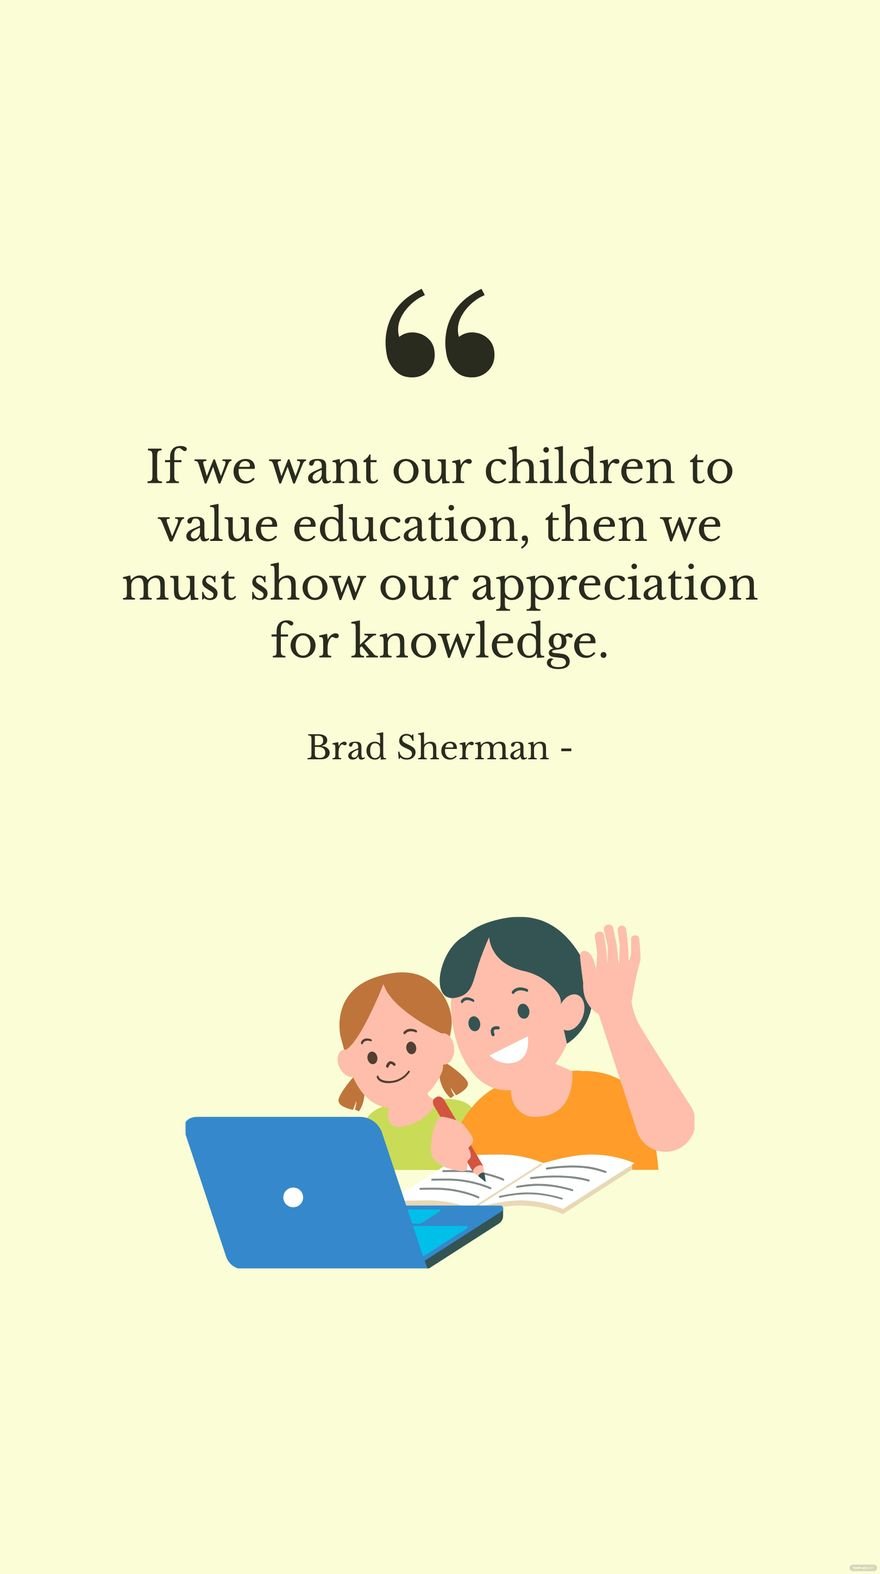 Brad Sherman - If we want our children to value education, then we must show our appreciation for knowledge. in JPG